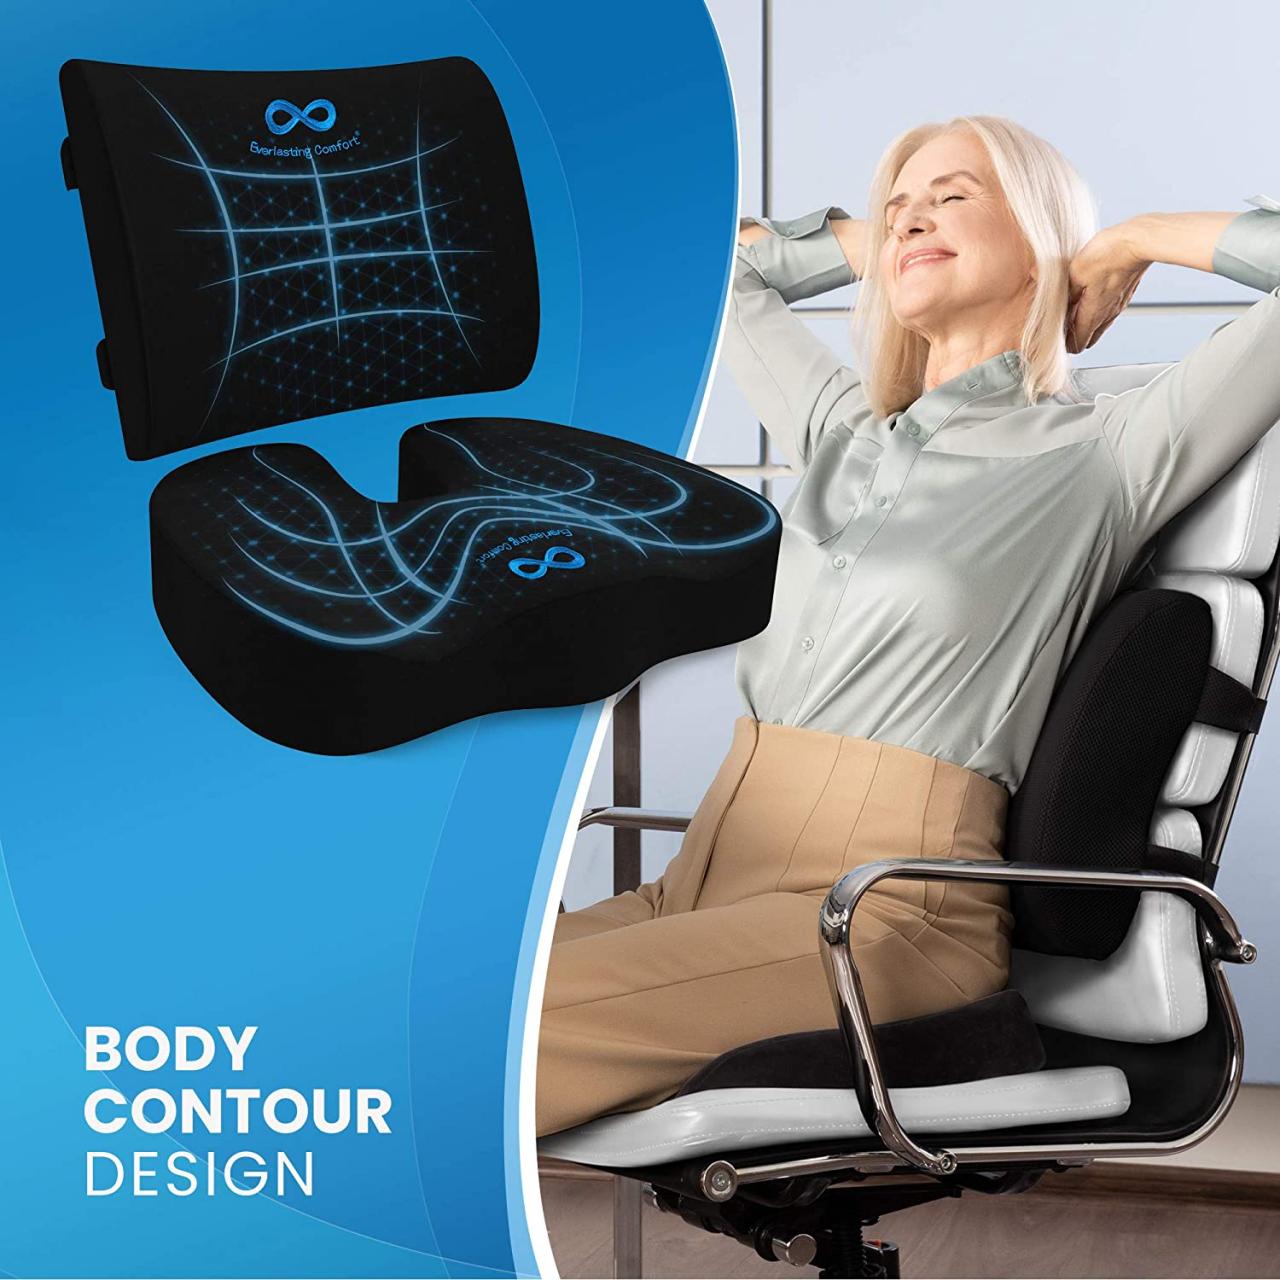 Buy Everlasting Comfort Gel Memory Foam Seat Cushion and Lumbar Support  Pillow for Office Chair Bundle Online in Hong Kong. B08B6C32DH